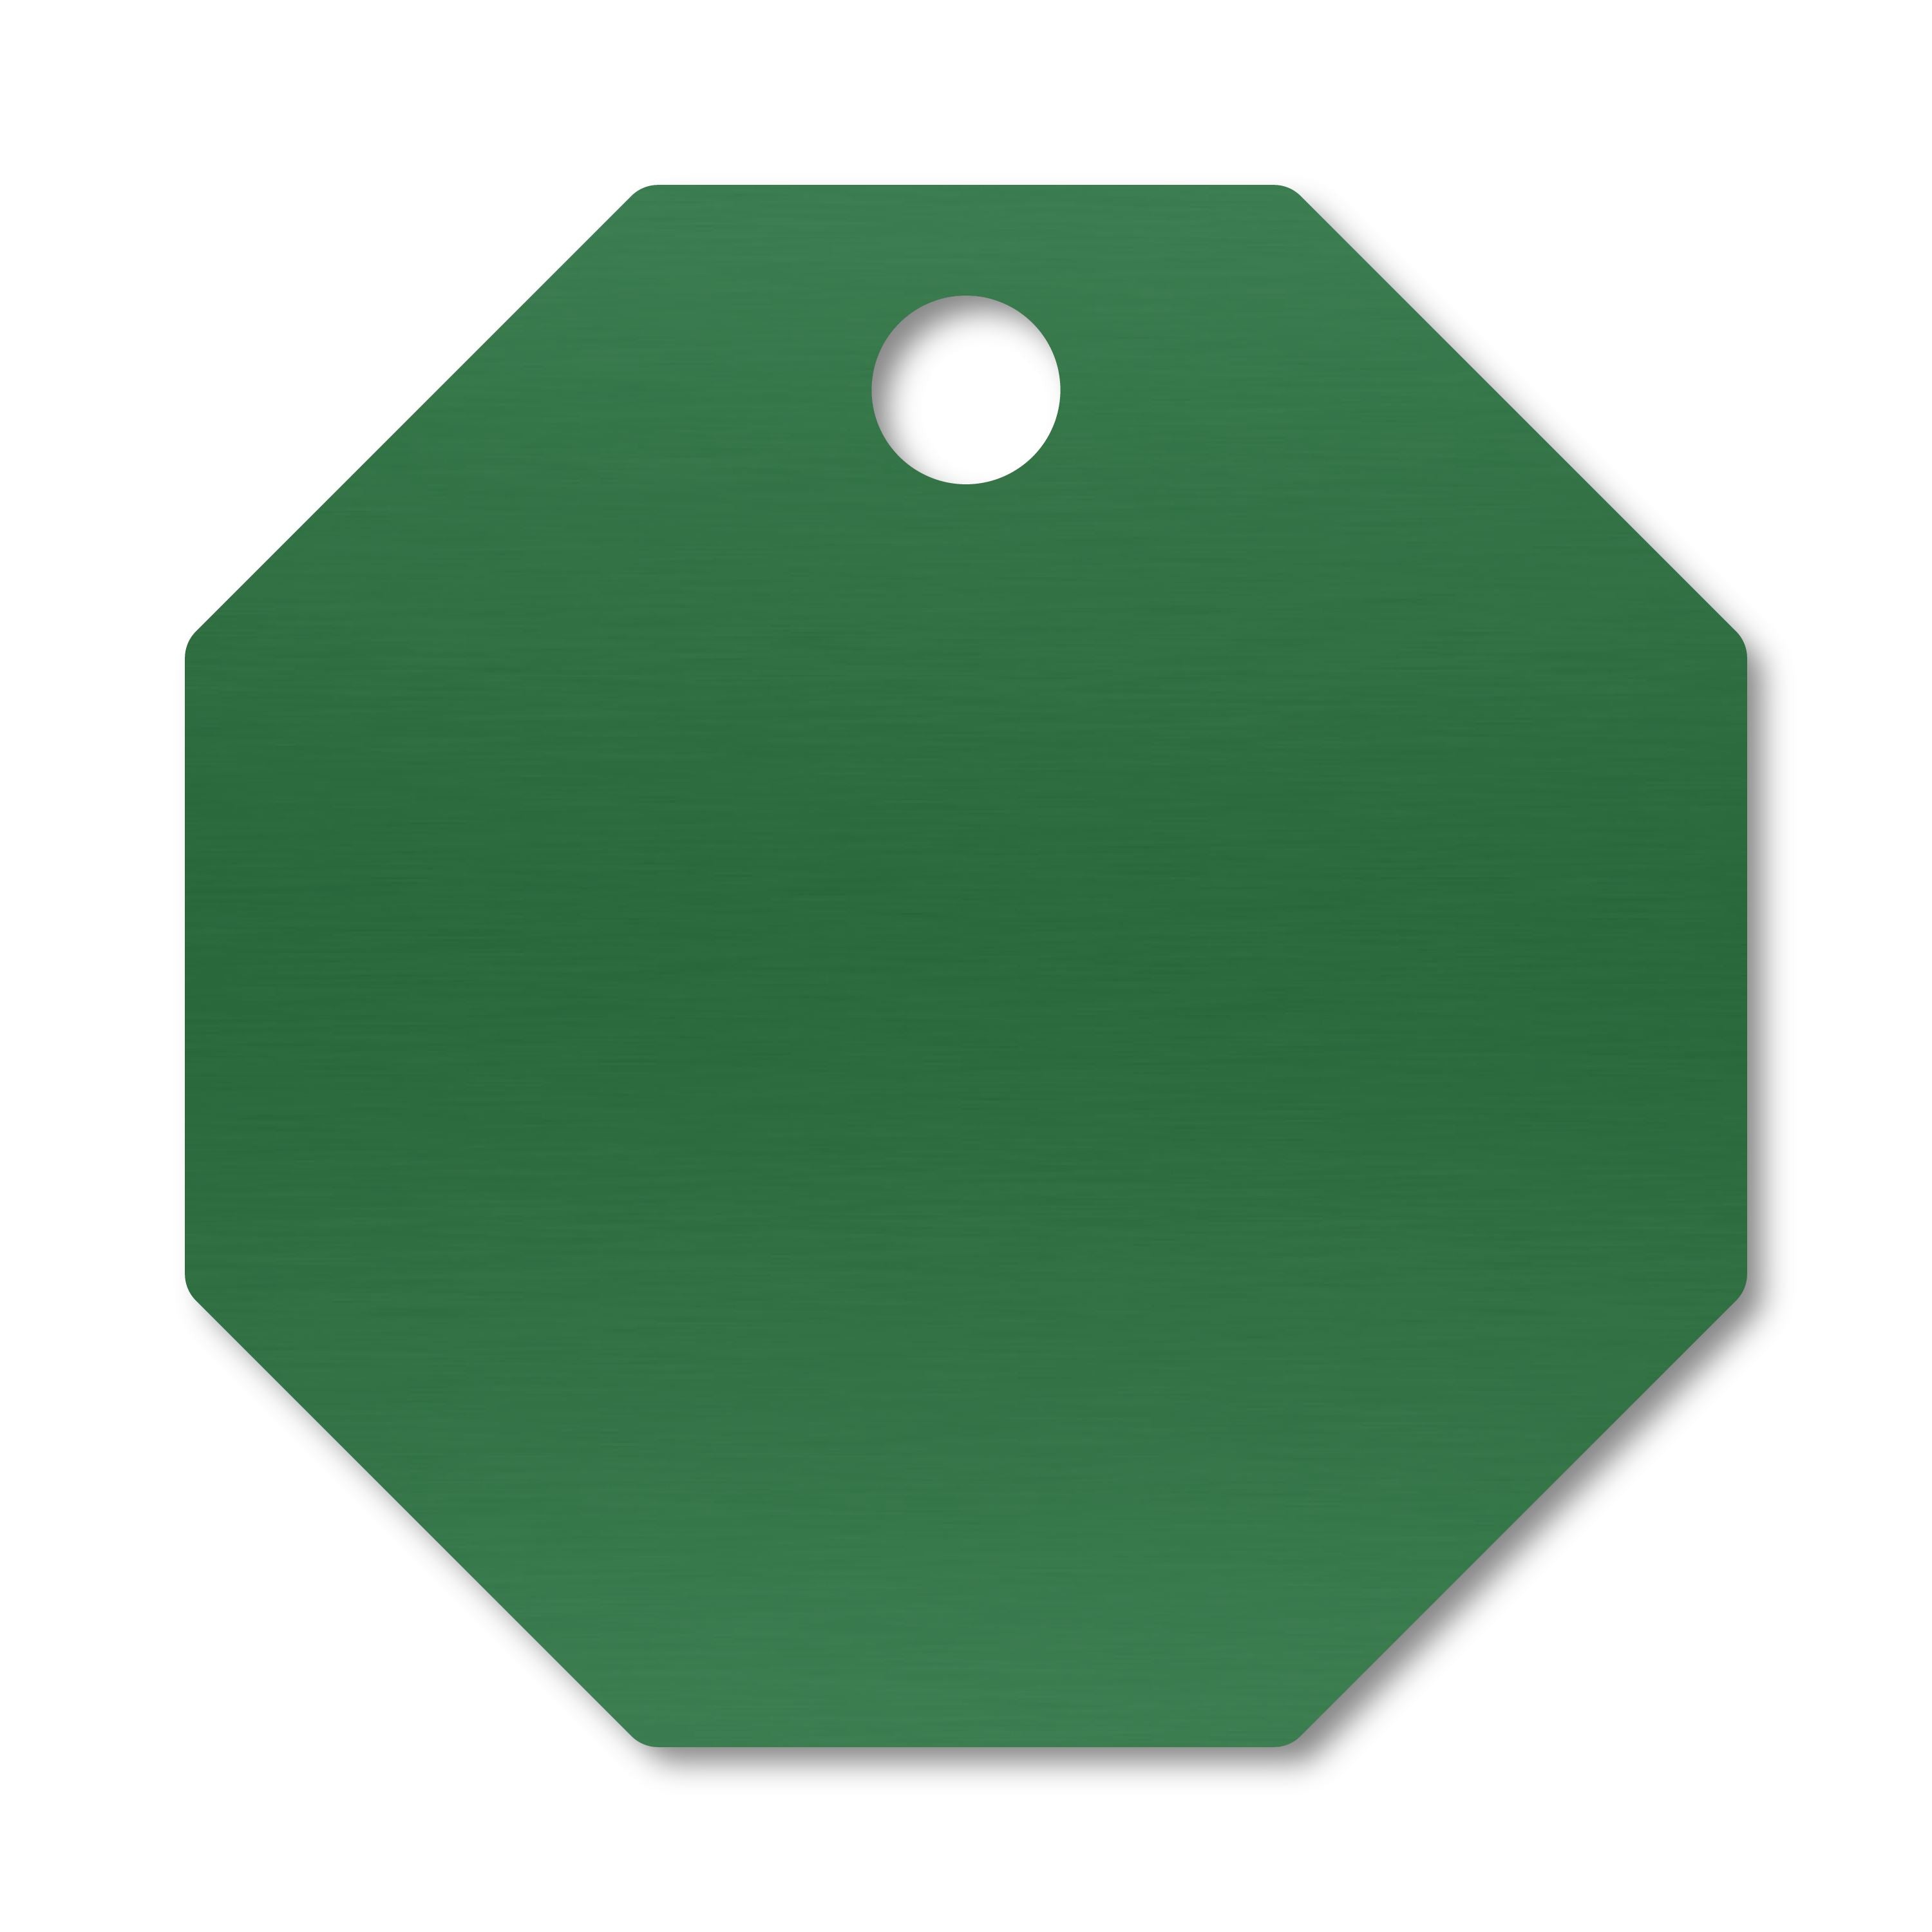 Anodized Aluminum Octagon Tags, 1" with 3/32" Hole, Laser Engraved Metal Tags Craftworks NW Green 